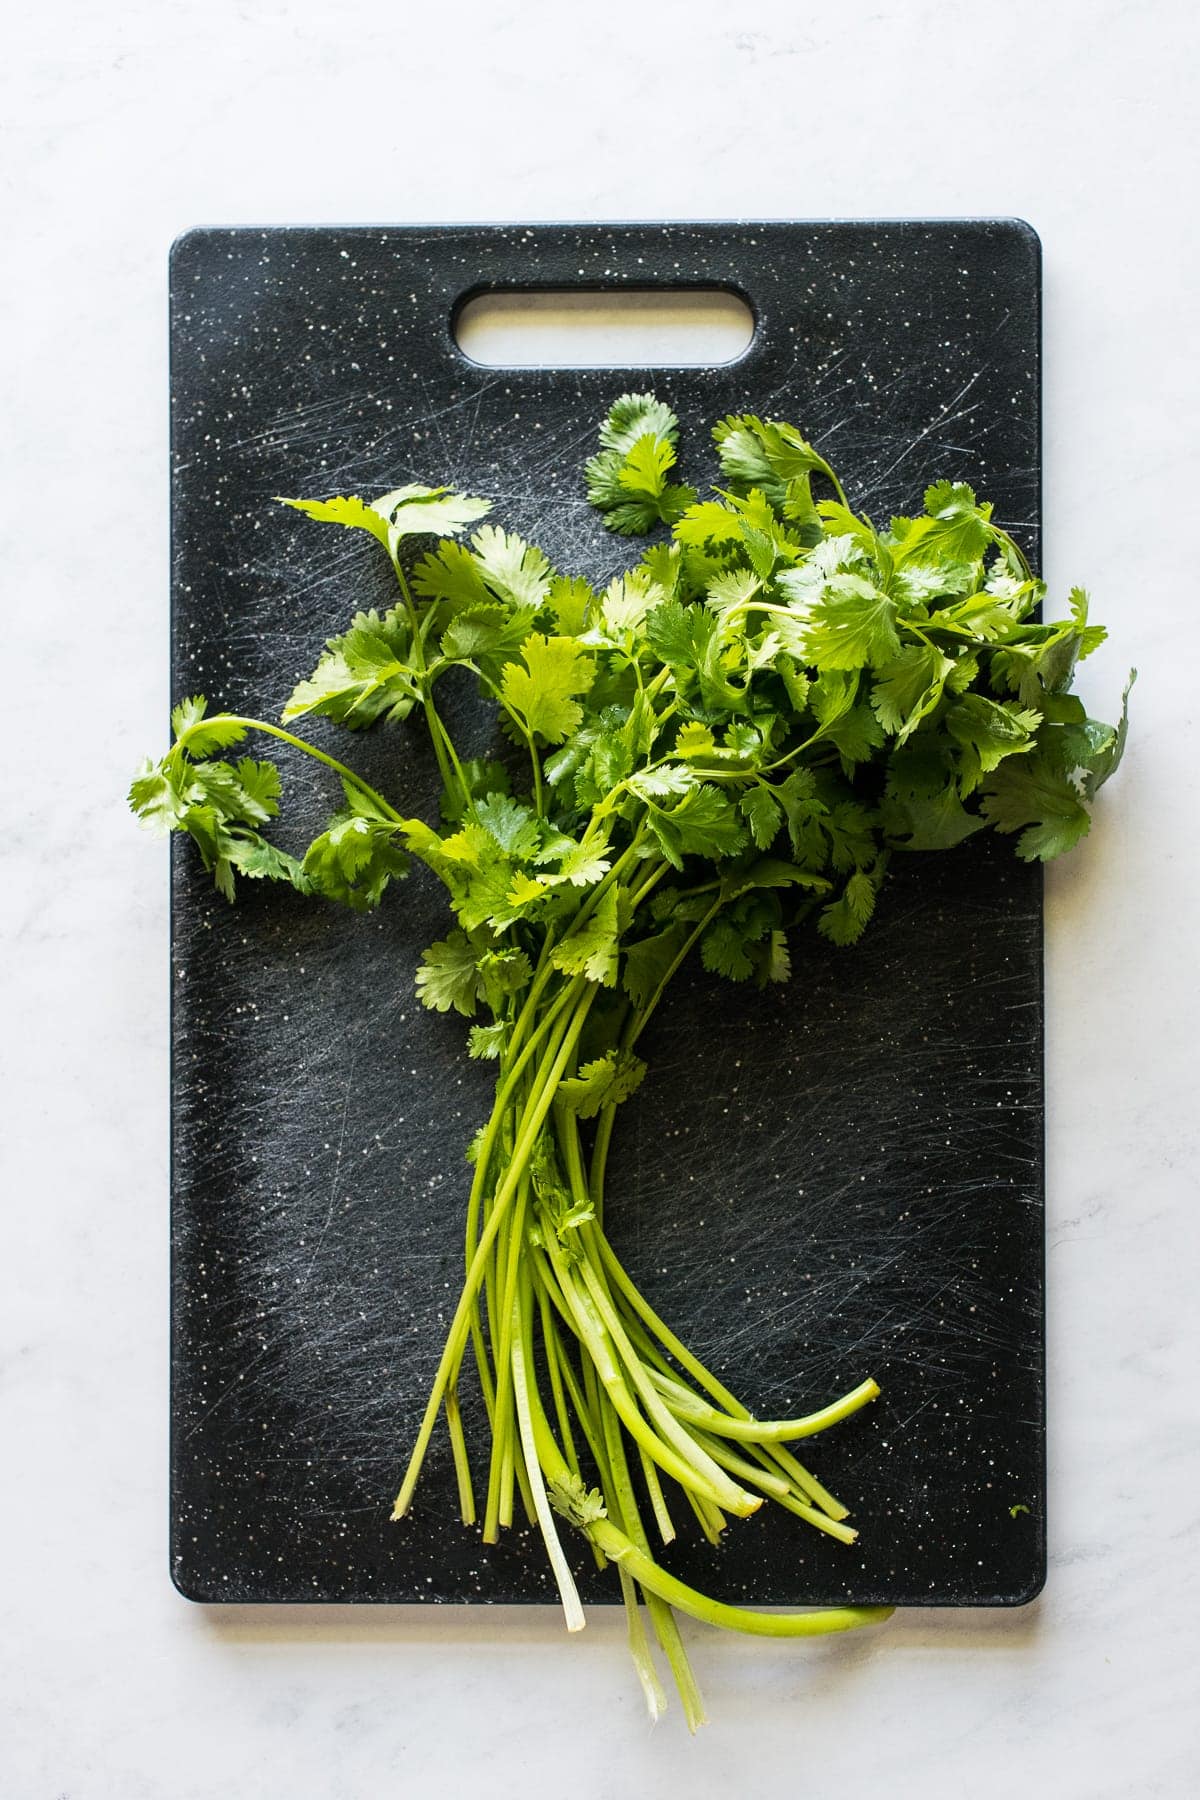 Cilantro and How to Use It